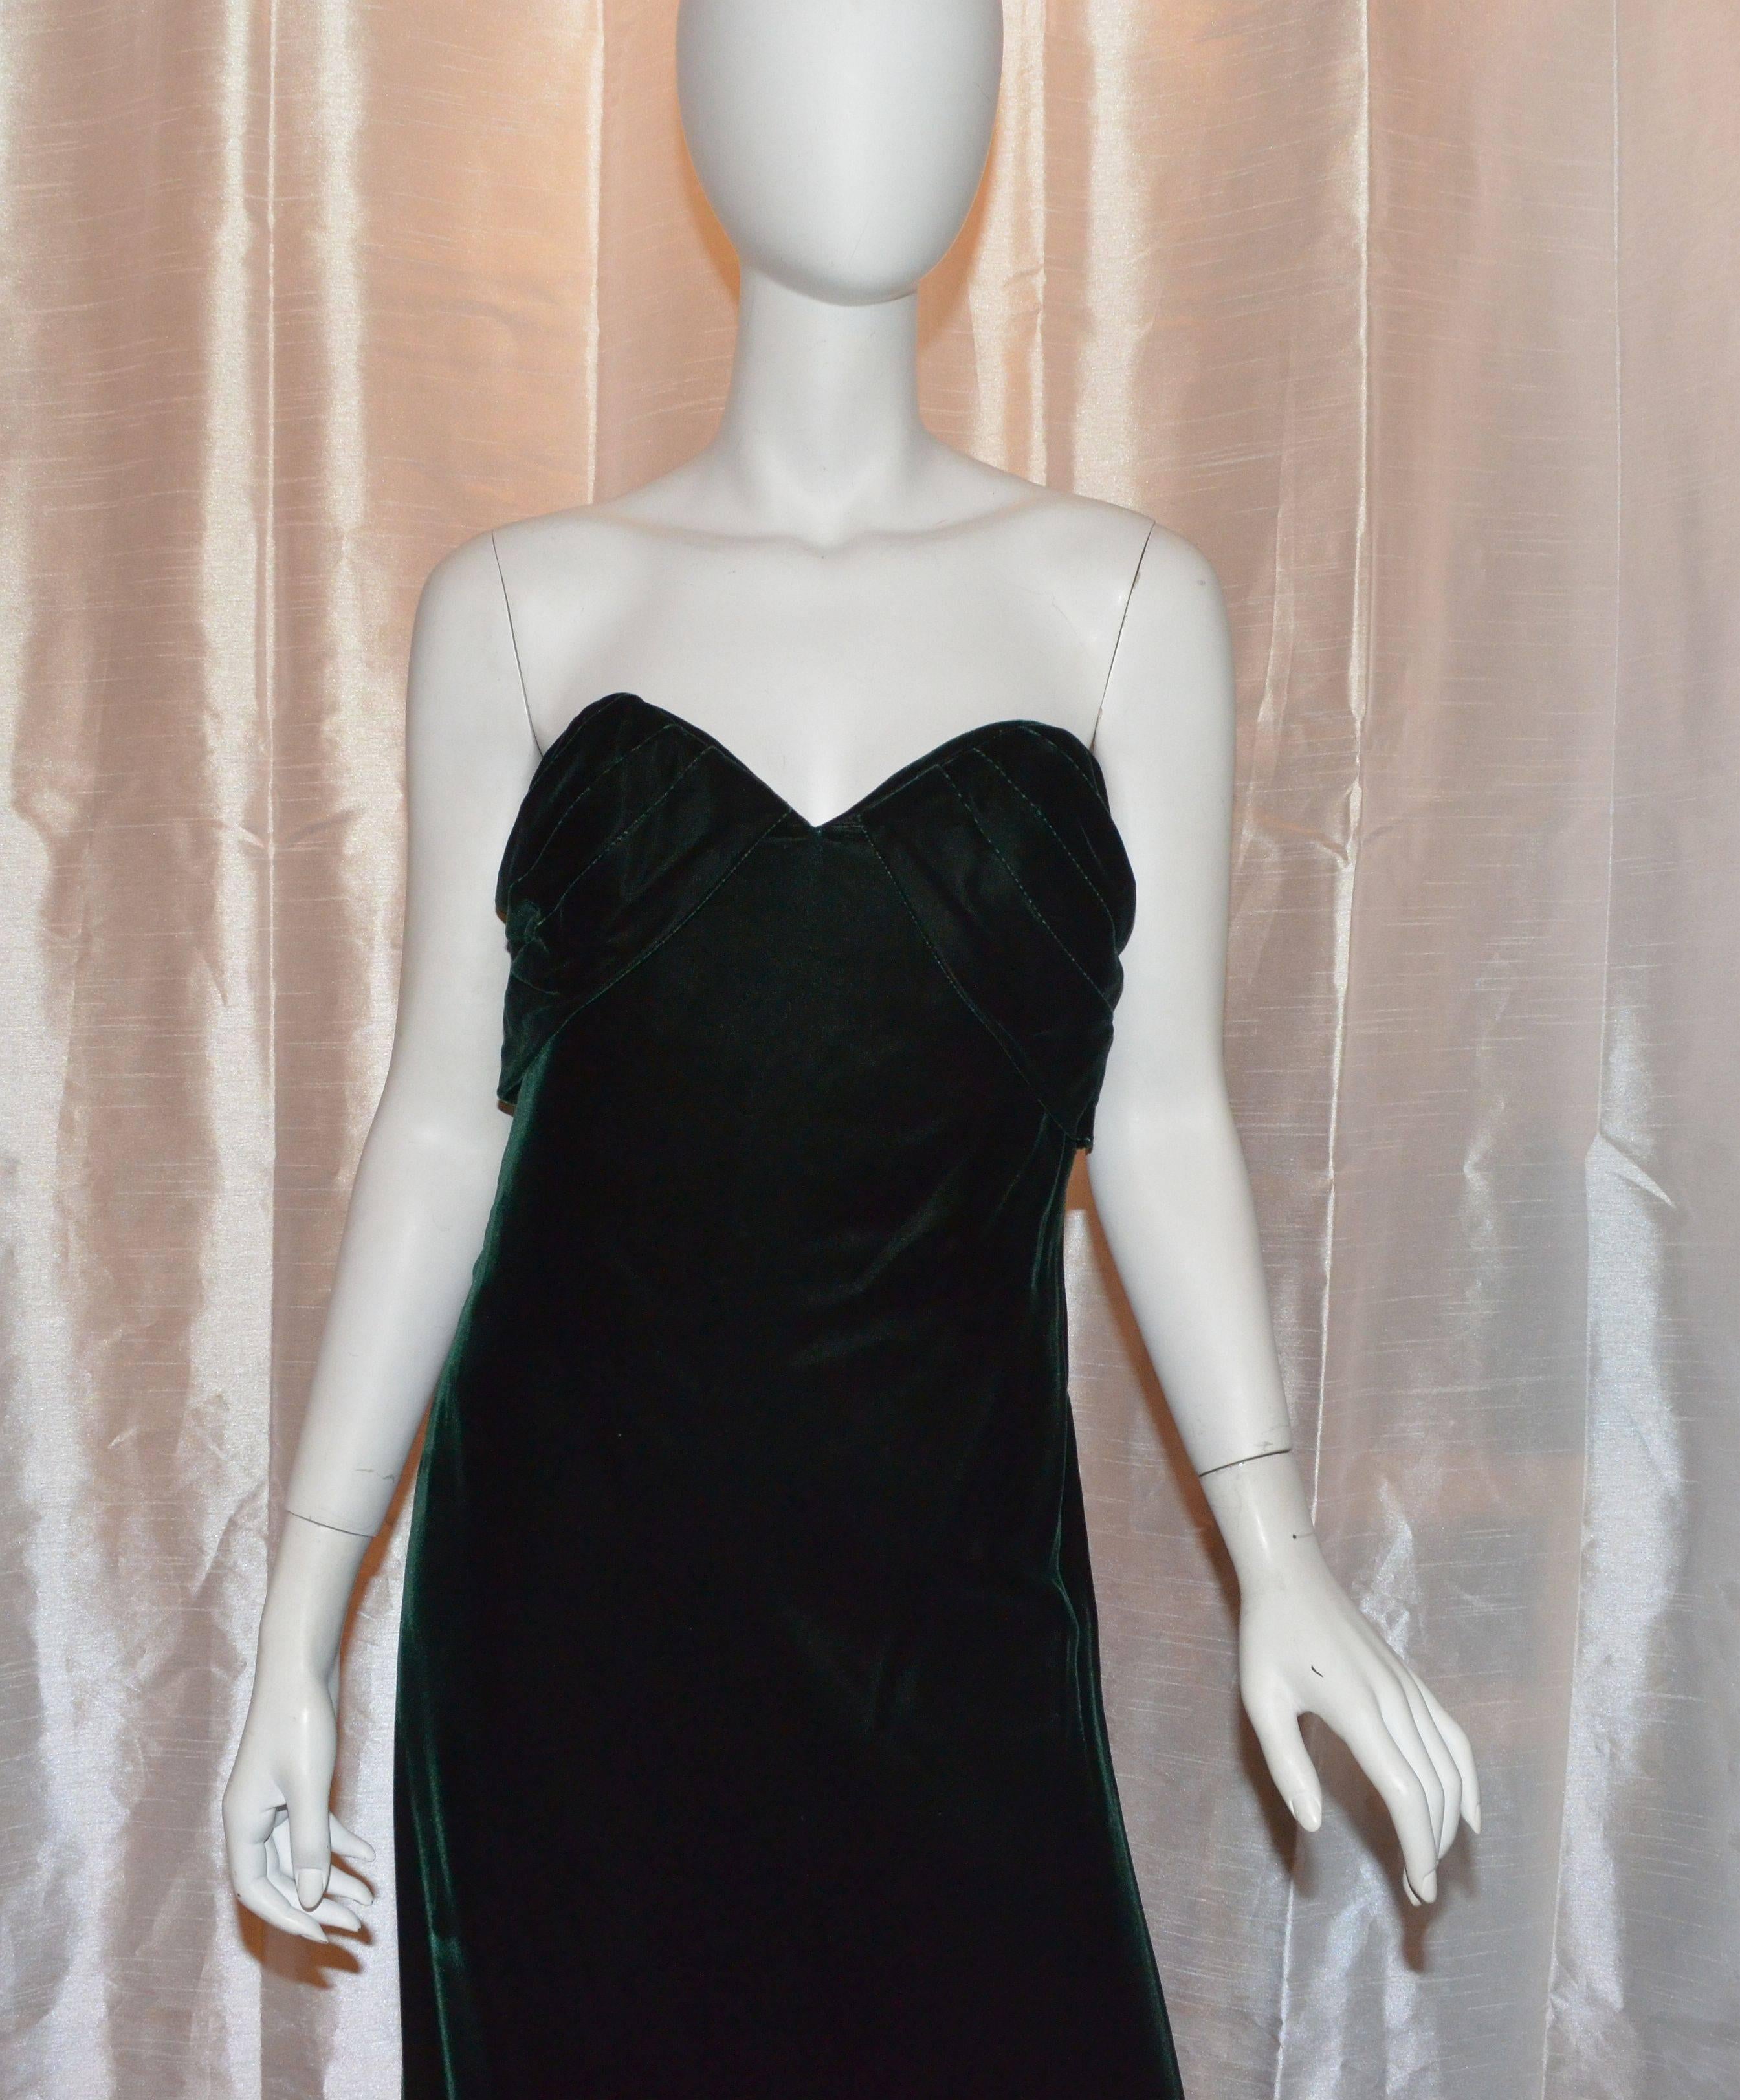 Vintage Bill Blass Green Velvet Strapless Long Dress Gown

Vintage Bill Blass gown is marked a size 6. Features a pin-tucked design on the bust, a back zipper and hook-and-eye closure, and is fully lined. Gorgeous draping and construction. soft